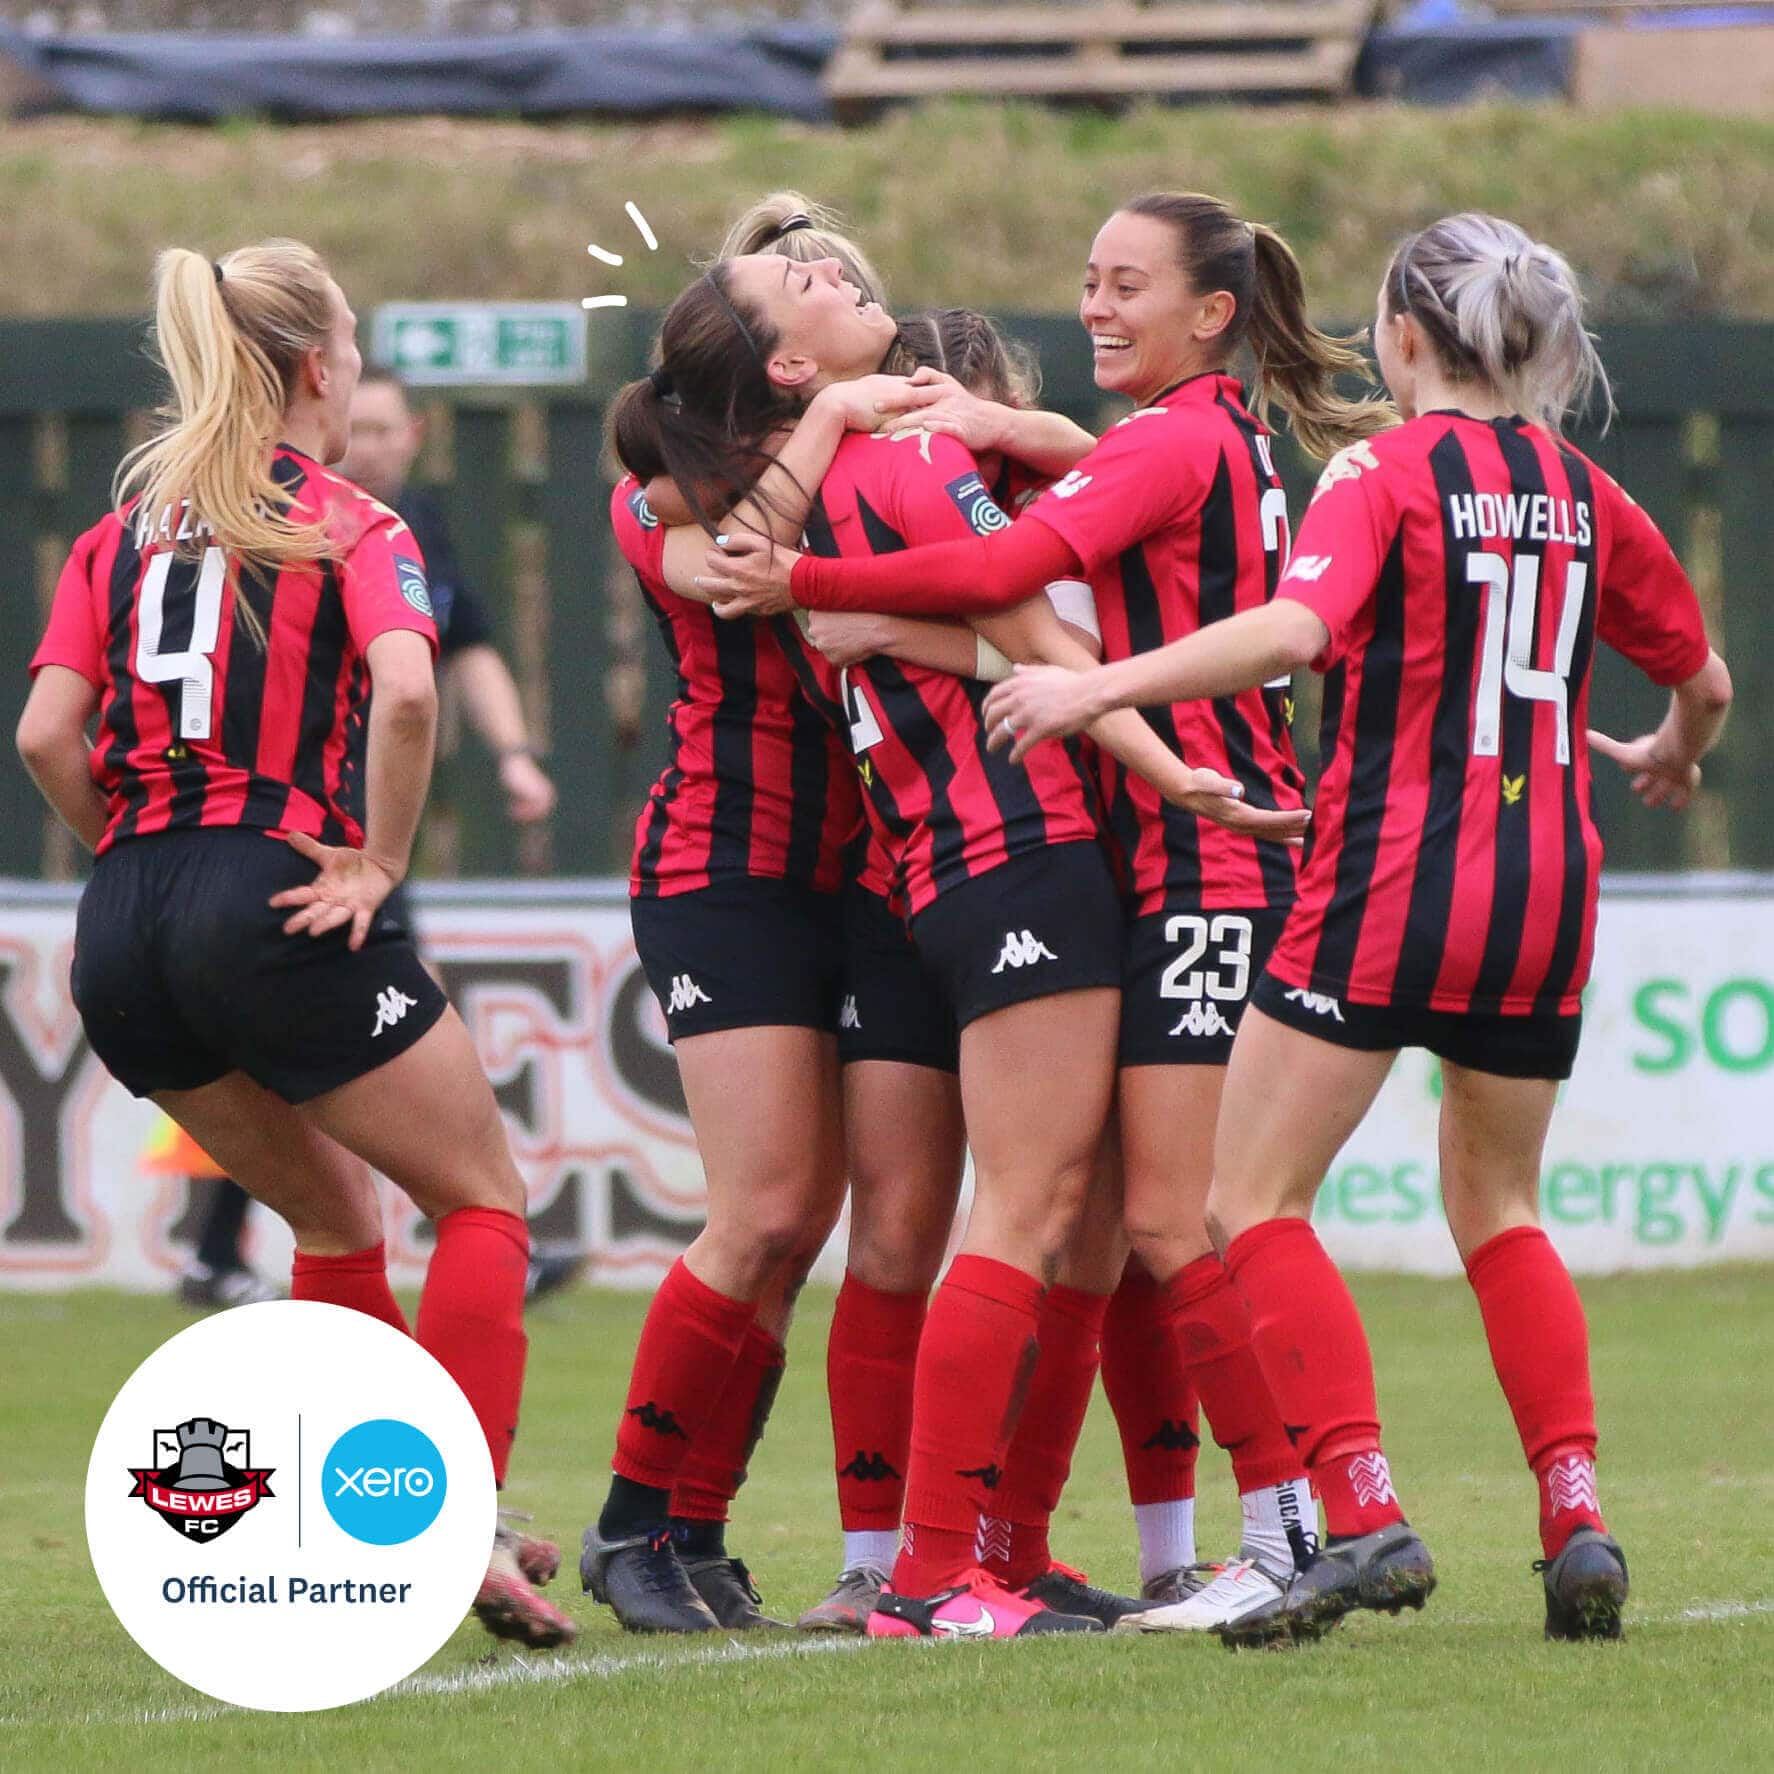 Women players from Lewes FC give a congratulatory hug to a teammate who has just scored a goal.